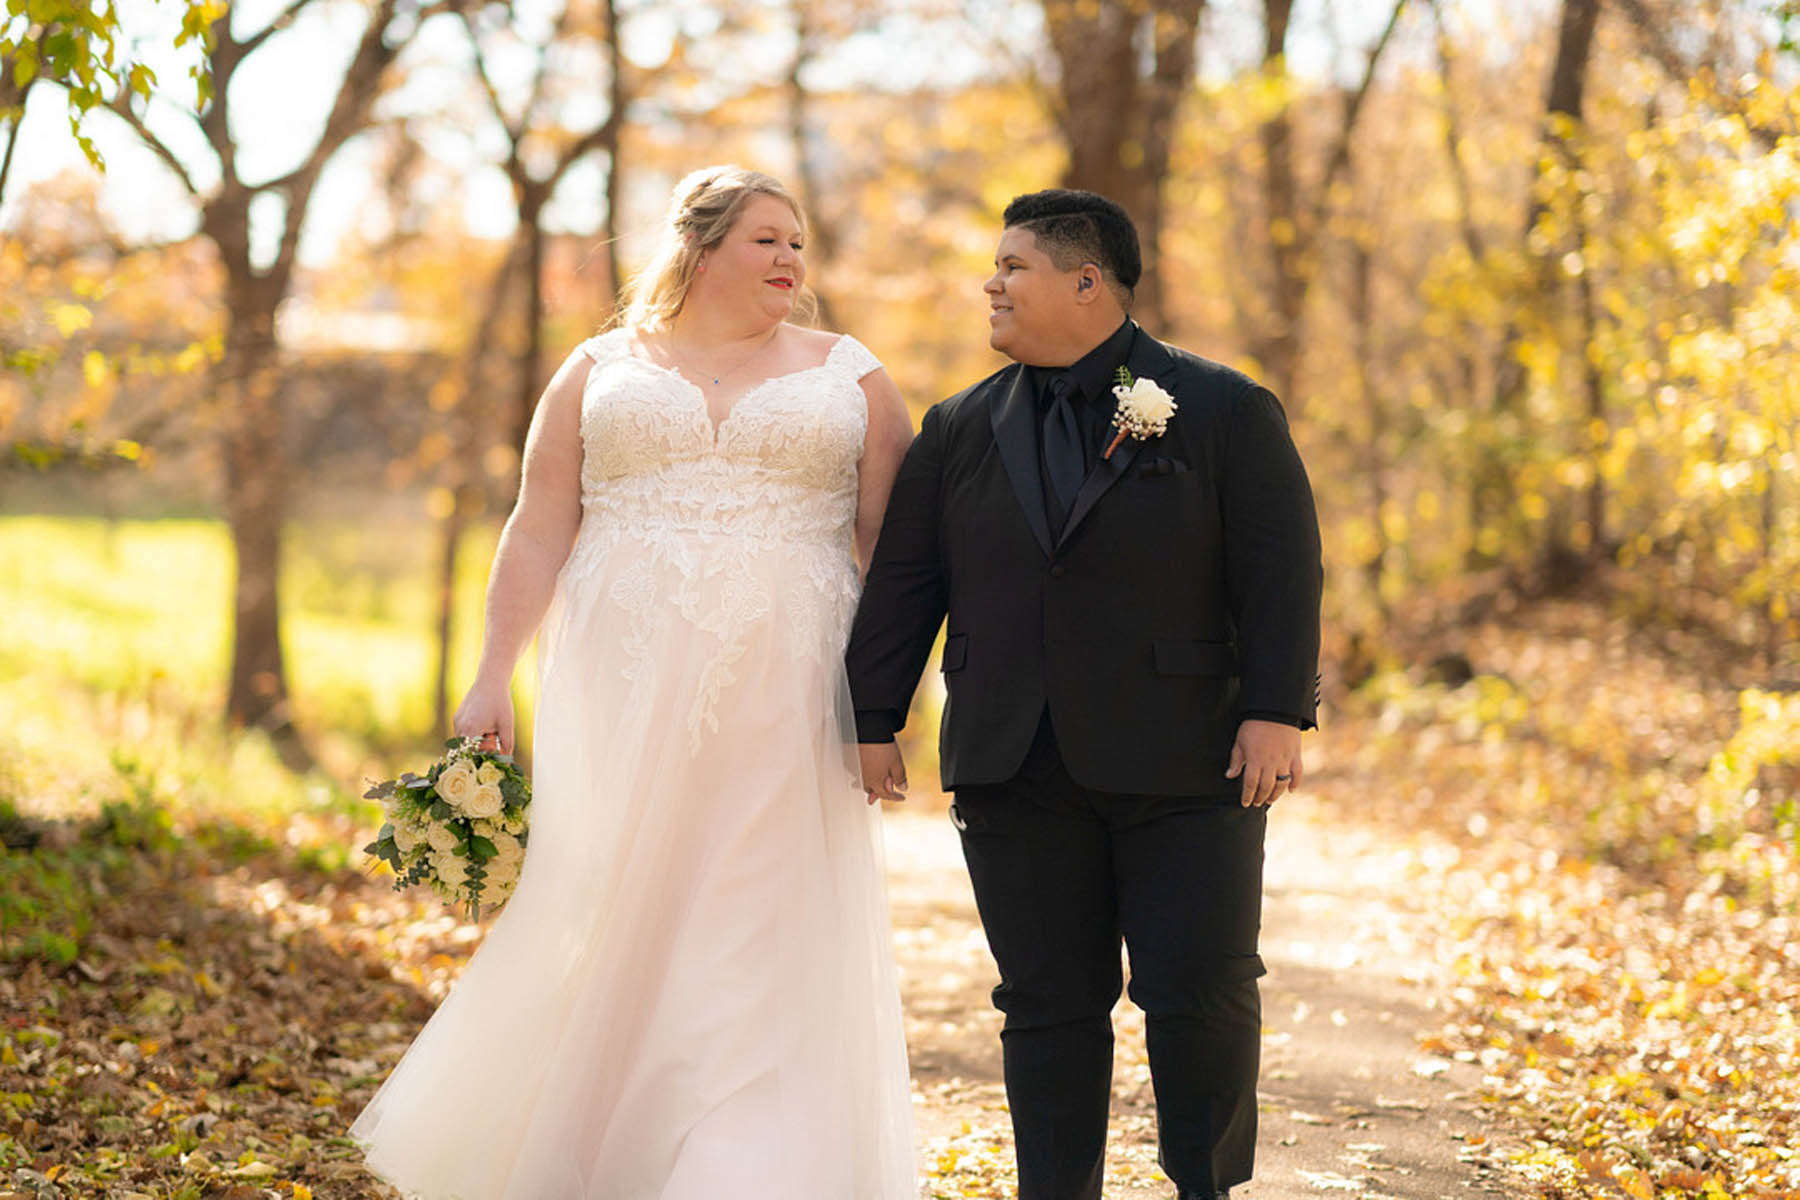 Two brides, one white in a white gown and one black in a black suit, walk hand in hand down an outdoor path with fall foliage in the background.